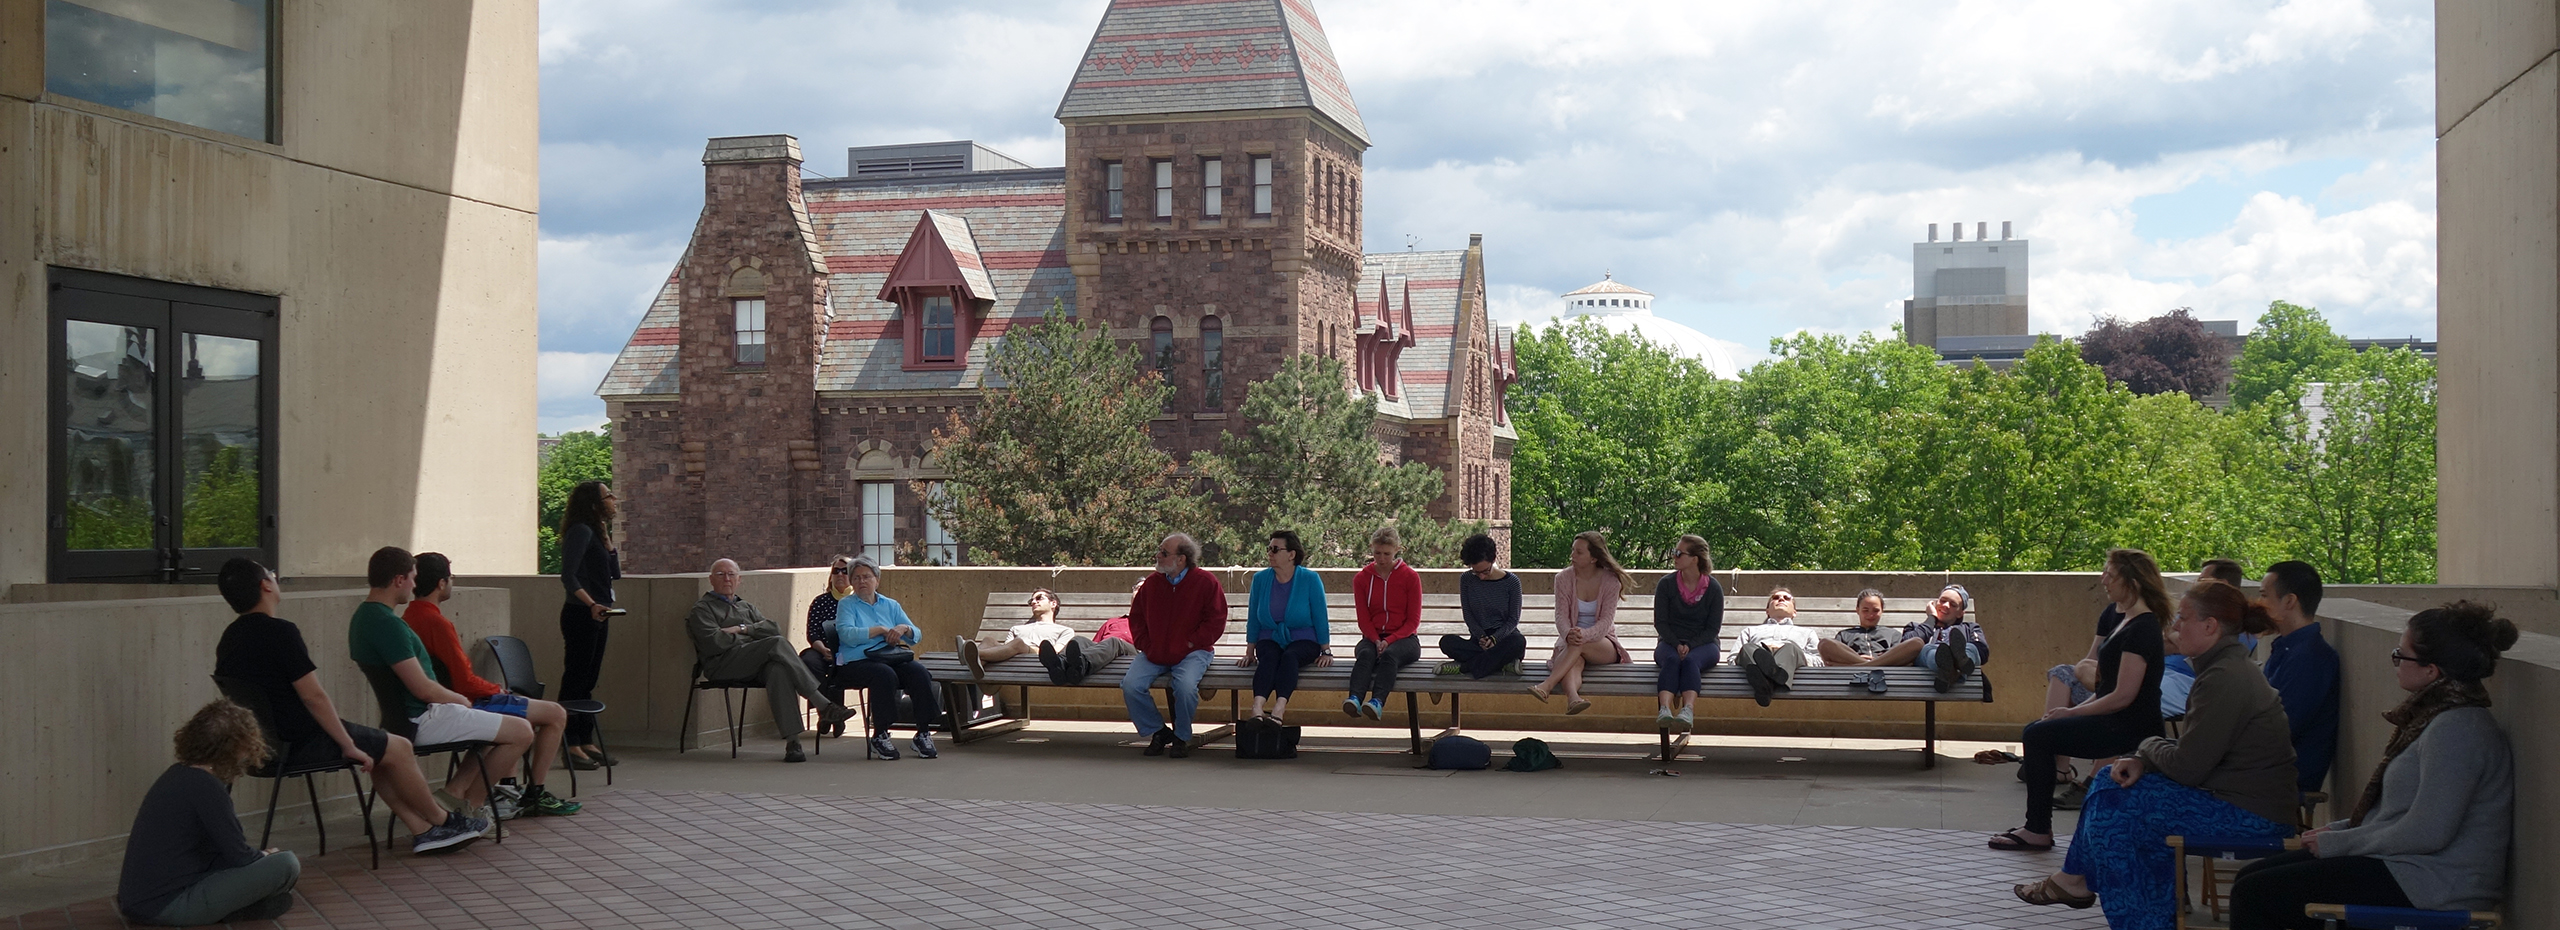 People sit on a long bench and chairs in an outdoor space with buildings in the background